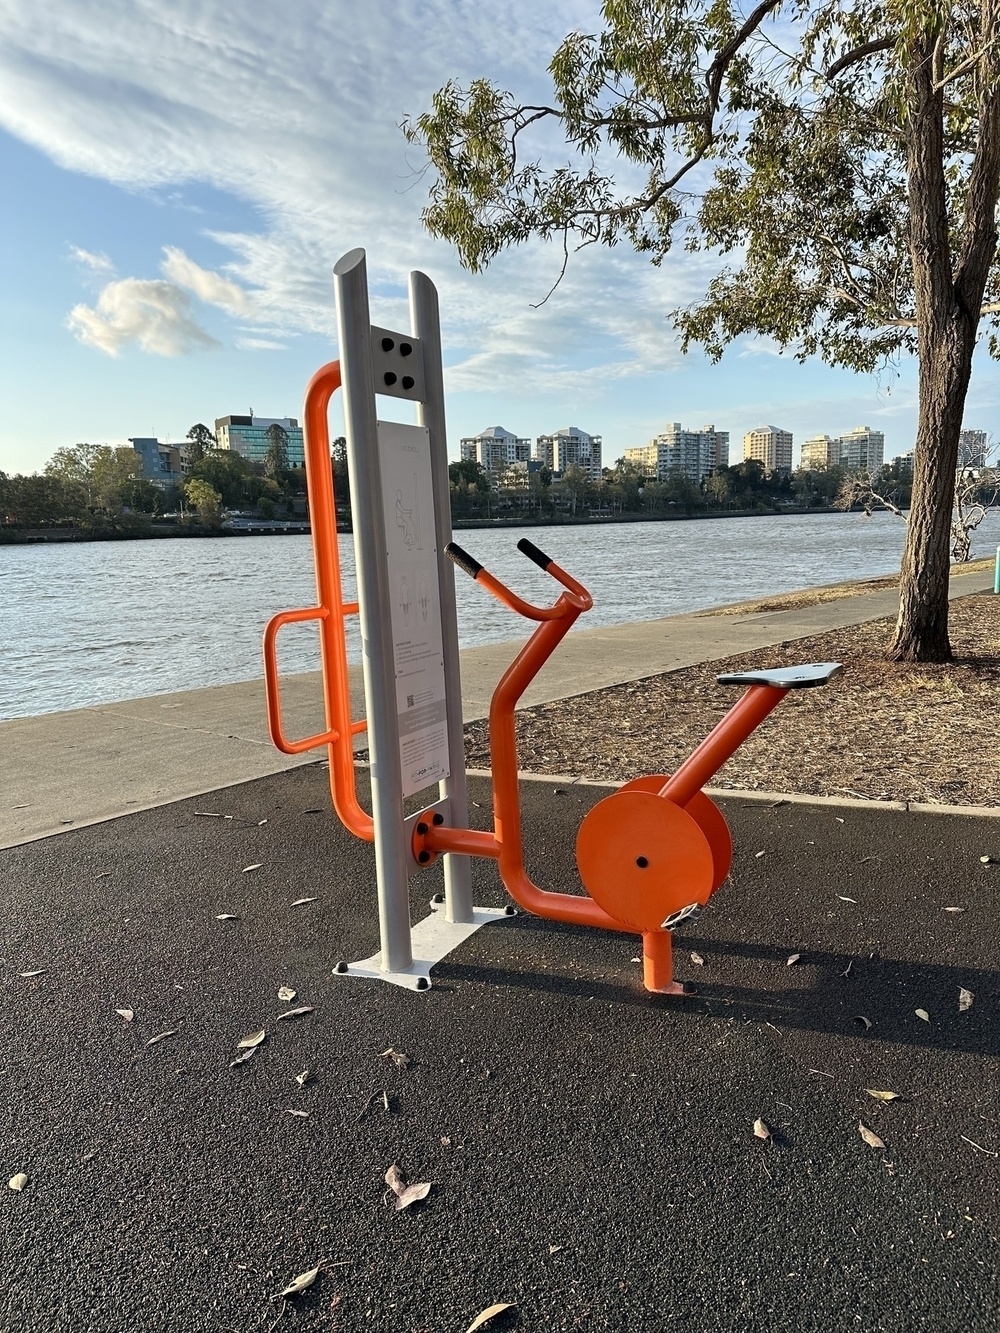 A rudimentary exercise bike made mainly from orange coloured metal pipes. Has a seat, handlebars and pedals but no actual wheels. There is grass, a tree and a river in the background.